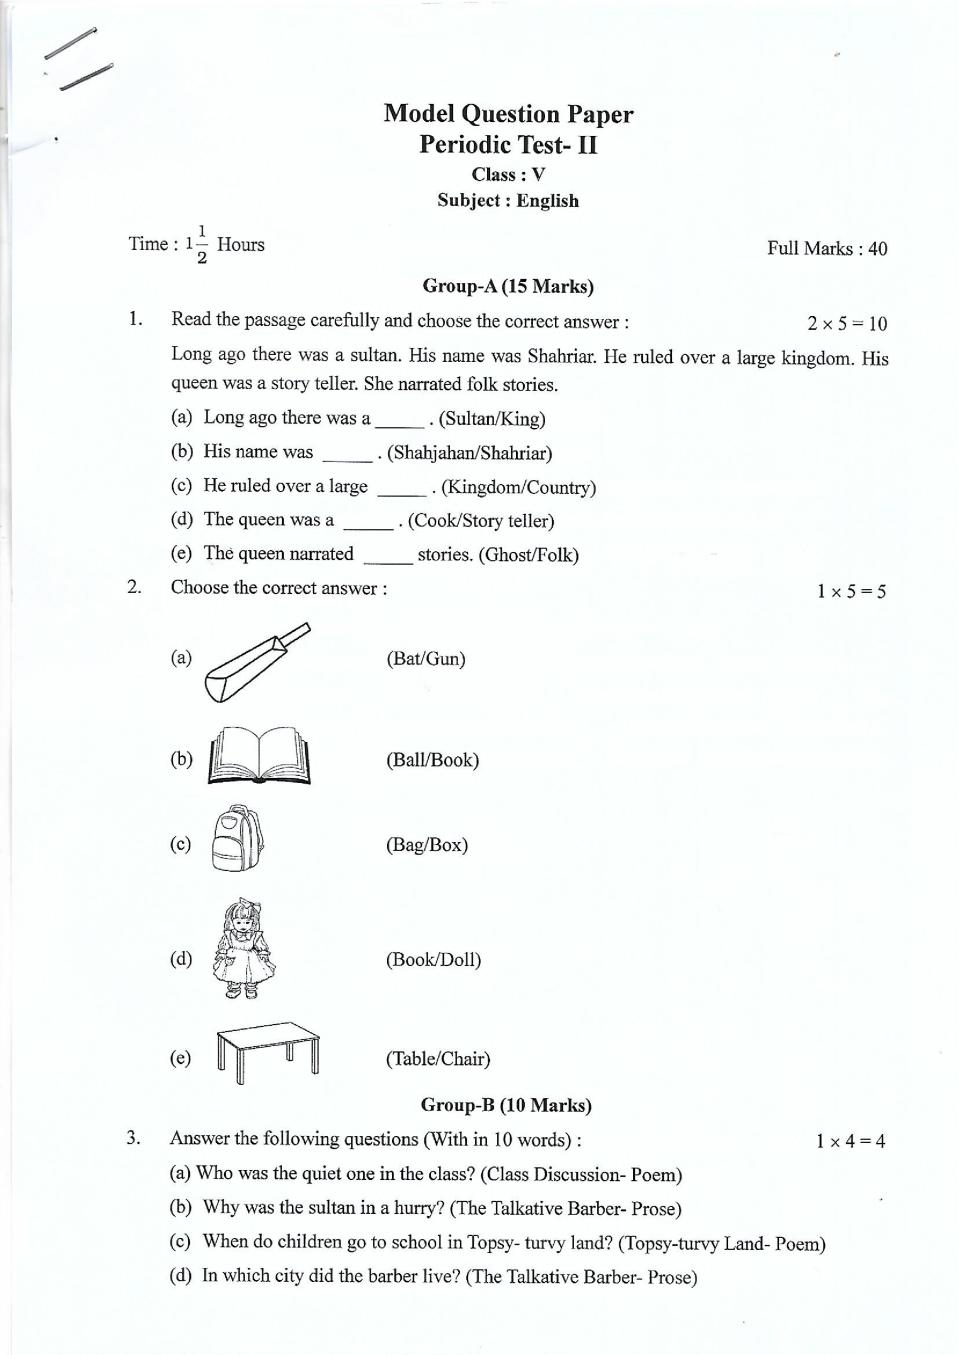 Tripura Board Model Question Paper for Class 5 Annual Exam - Page 1